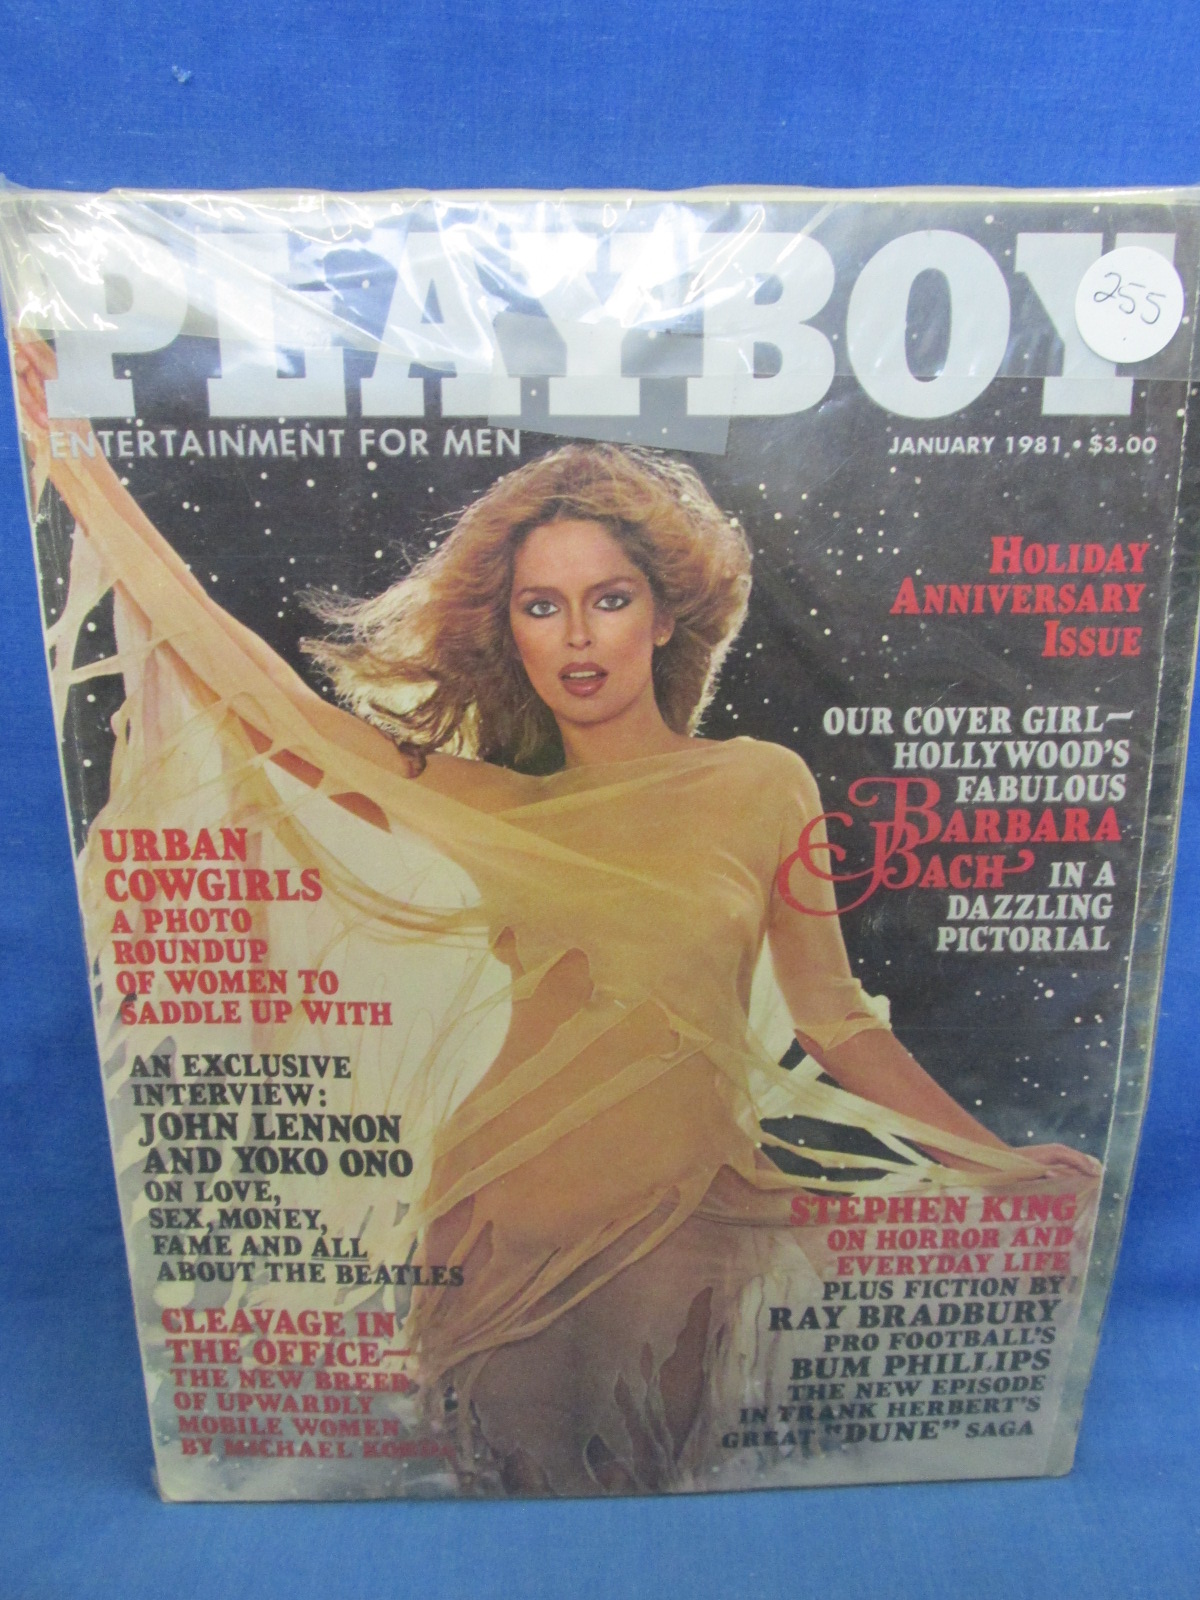 donna taneo recommends barbara bach playboy pic